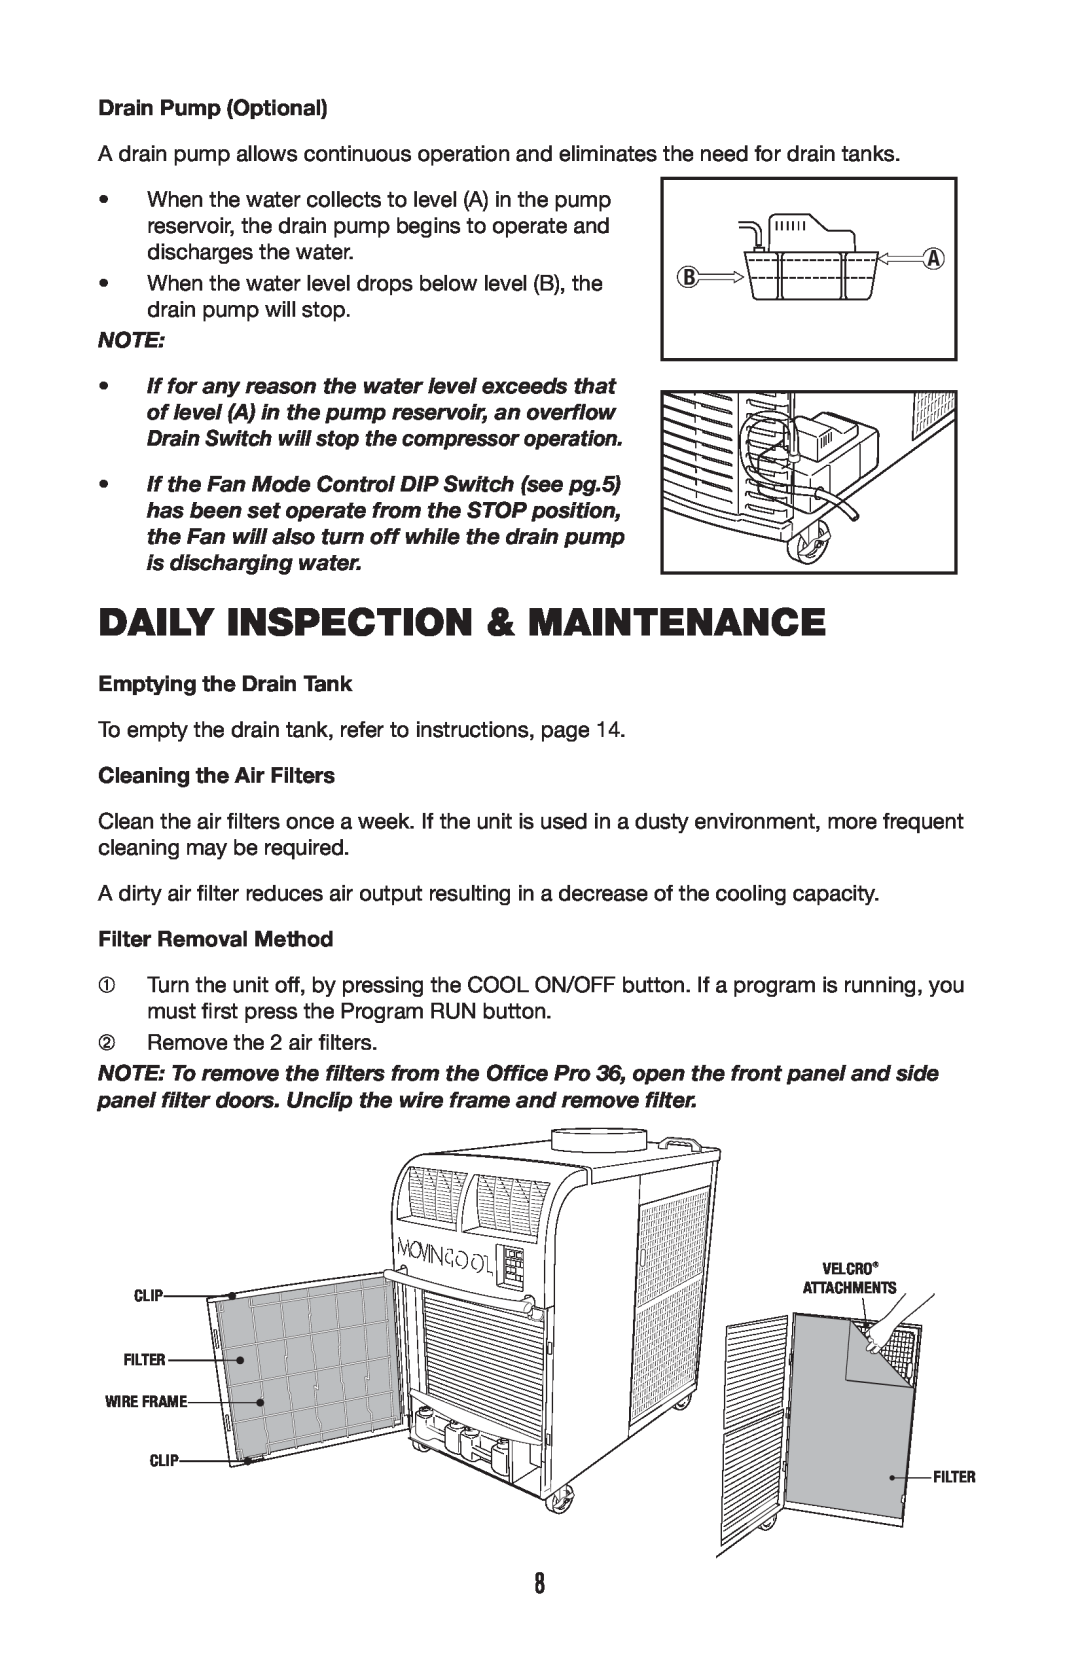 Denso OFFICE PRO 36 Daily Inspection & Maintenance, Drain Pump Optional, Emptying the Drain Tank, Cleaning the Air Filters 